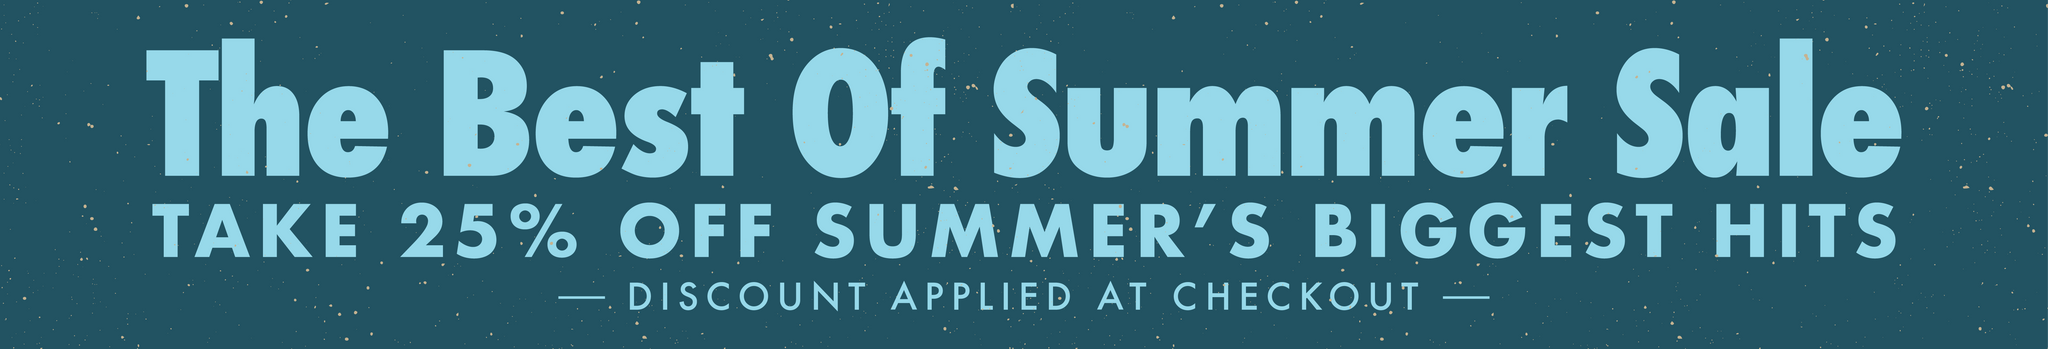 Best Of Summer Sale | All